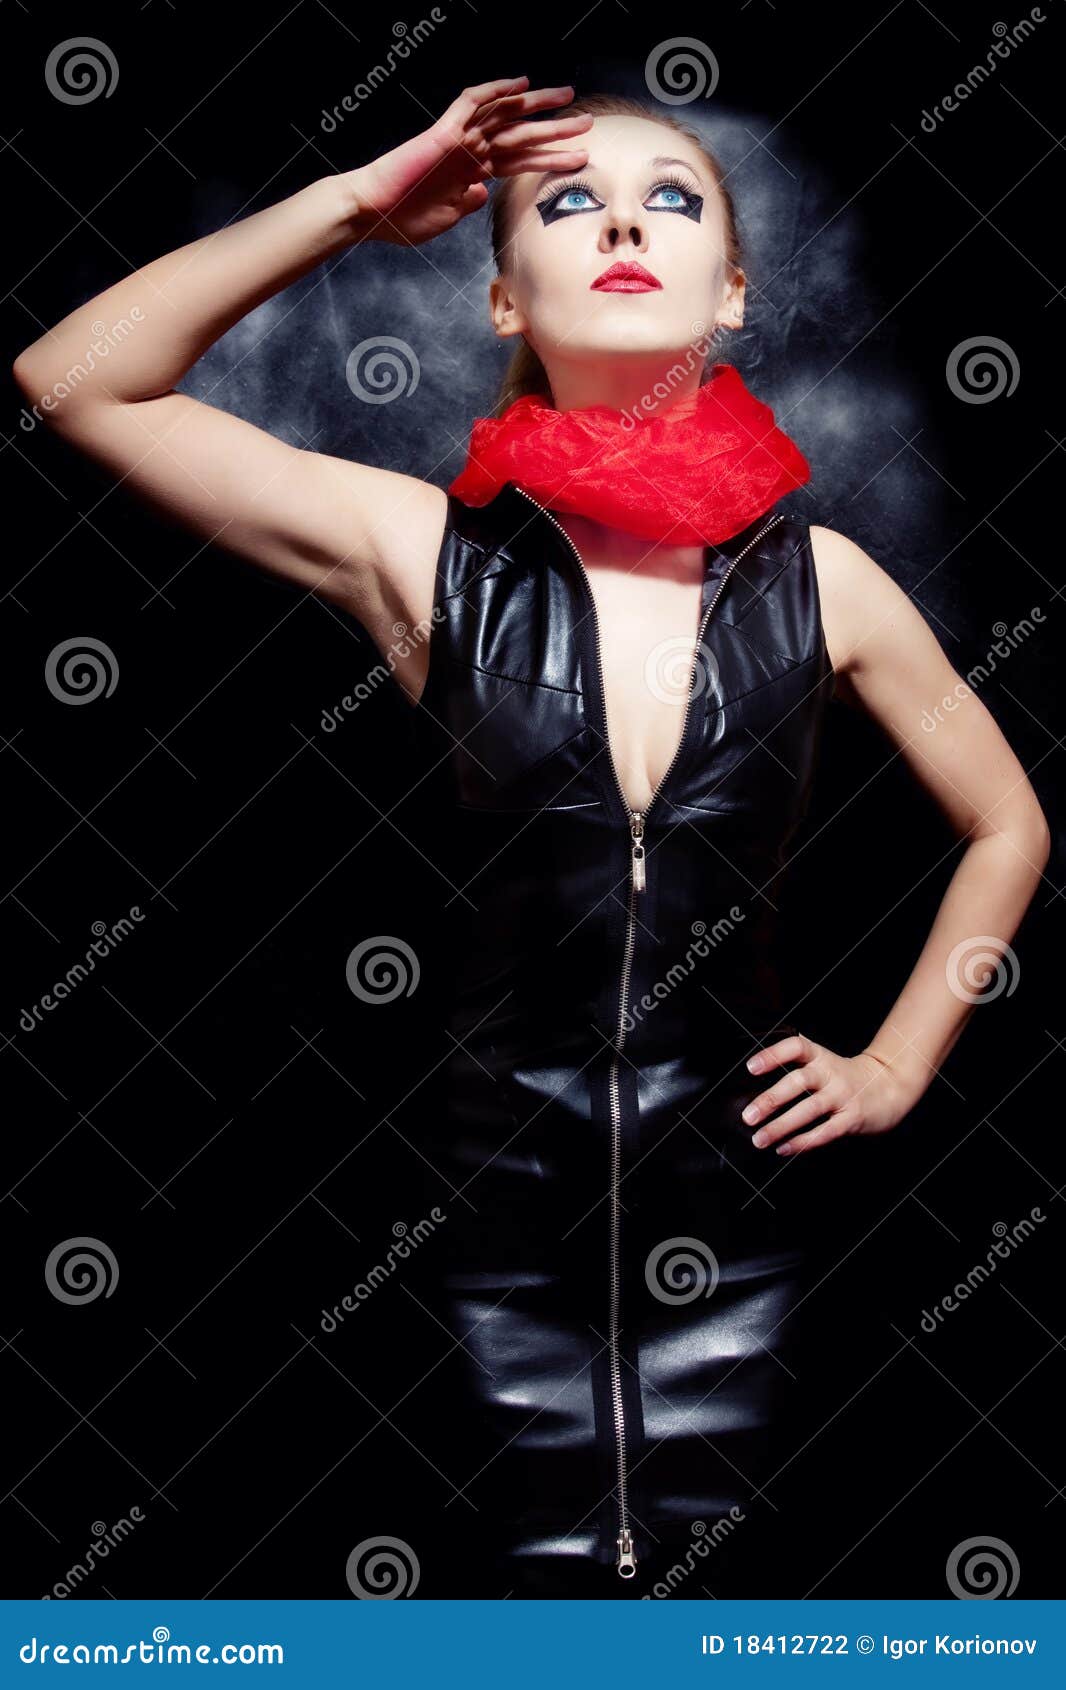 Beautiful Woman In Black Leather Dress Stock Photography - Image: 18412722